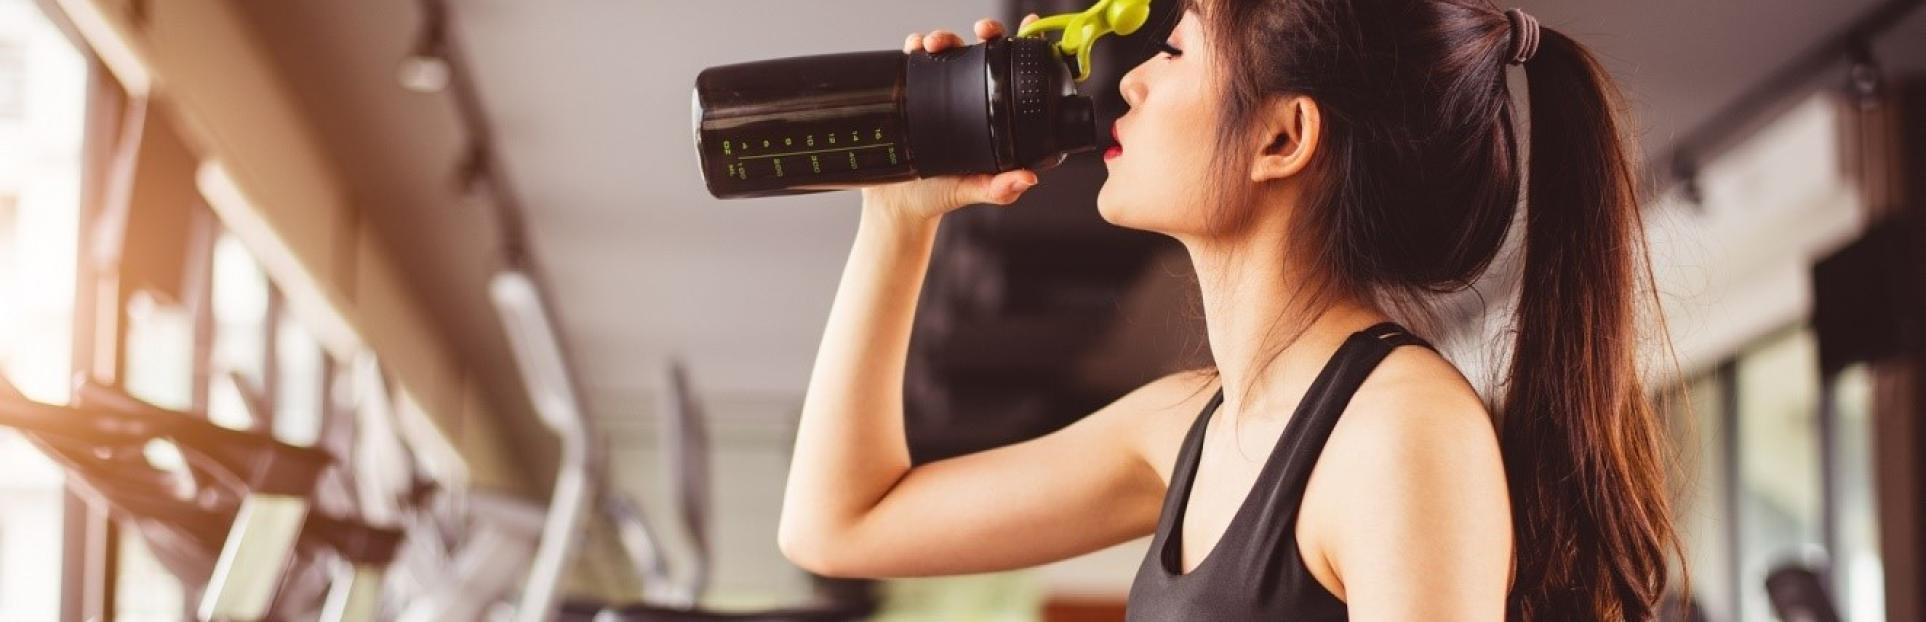 woman in gym drinking protein drink Sports Nutrition A Look at 2020 Chinese Consumer Trends